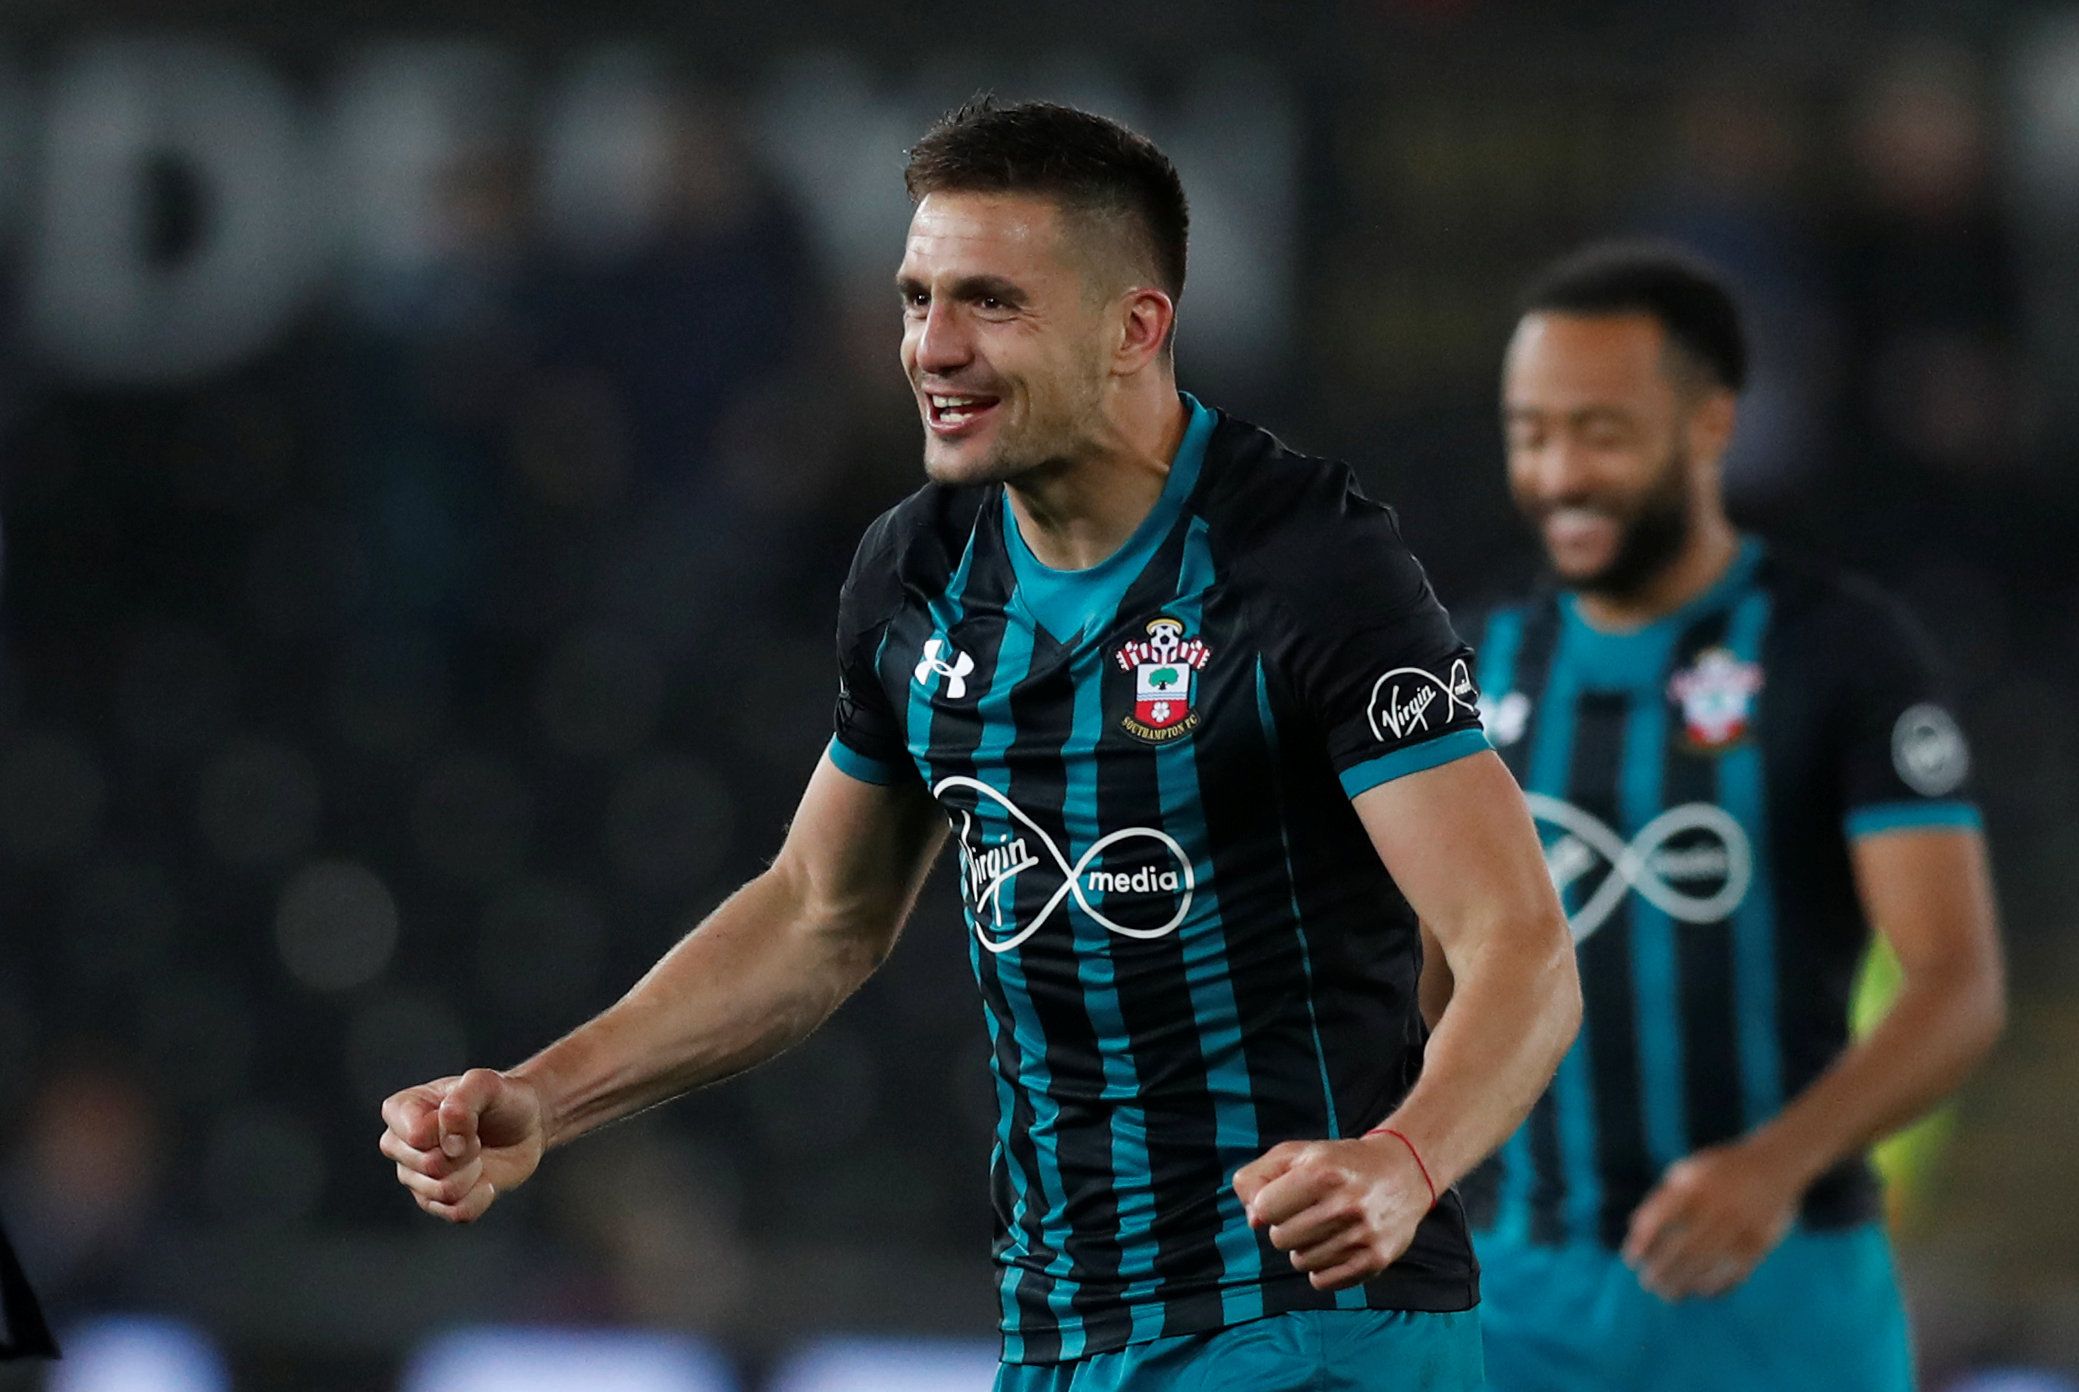 Soccer Football - Premier League - Swansea City v Southampton - Liberty Stadium, Swansea, Britain - May 8, 2018   Southampton's Dusan Tadic celebrates after the match    Action Images via Reuters/Peter Cziborra    EDITORIAL USE ONLY. No use with unauthorized audio, video, data, fixture lists, club/league logos or "live" services. Online in-match use limited to 75 images, no video emulation. No use in betting, games or single club/league/player publications.  Please contact your account represent